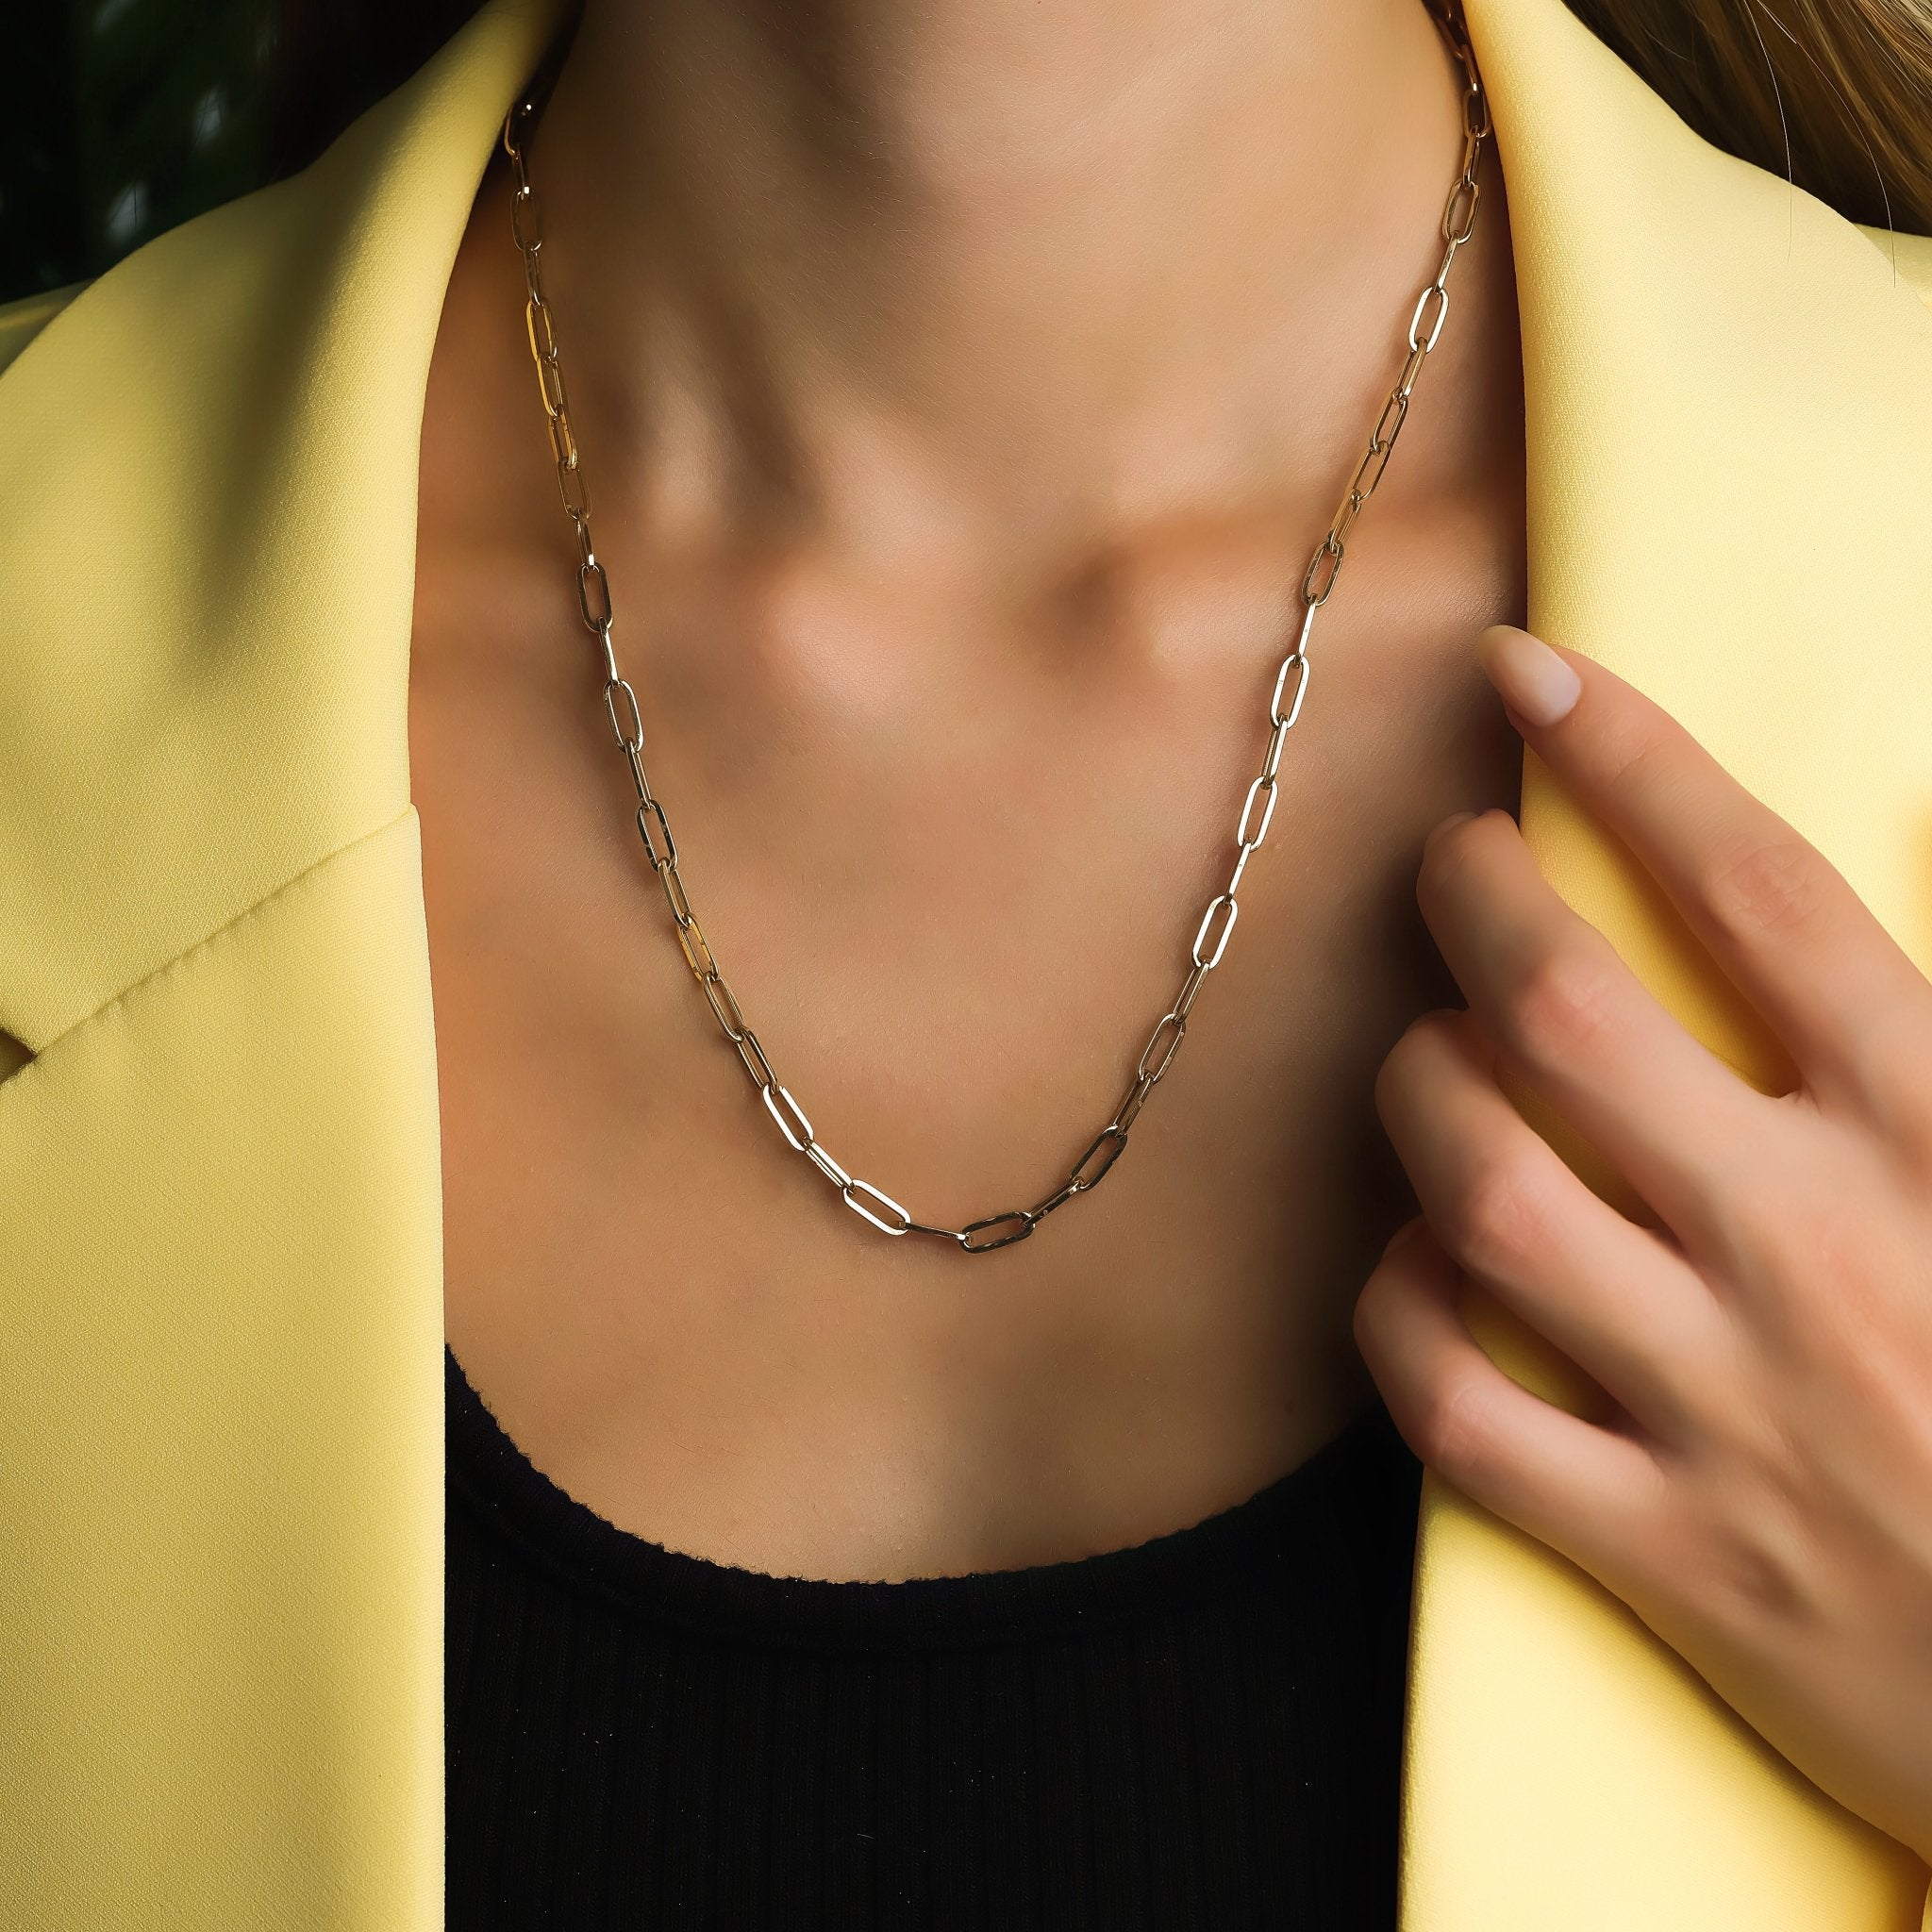 Gold Paperclip Chain Necklace - Gold Paperclip Necklace